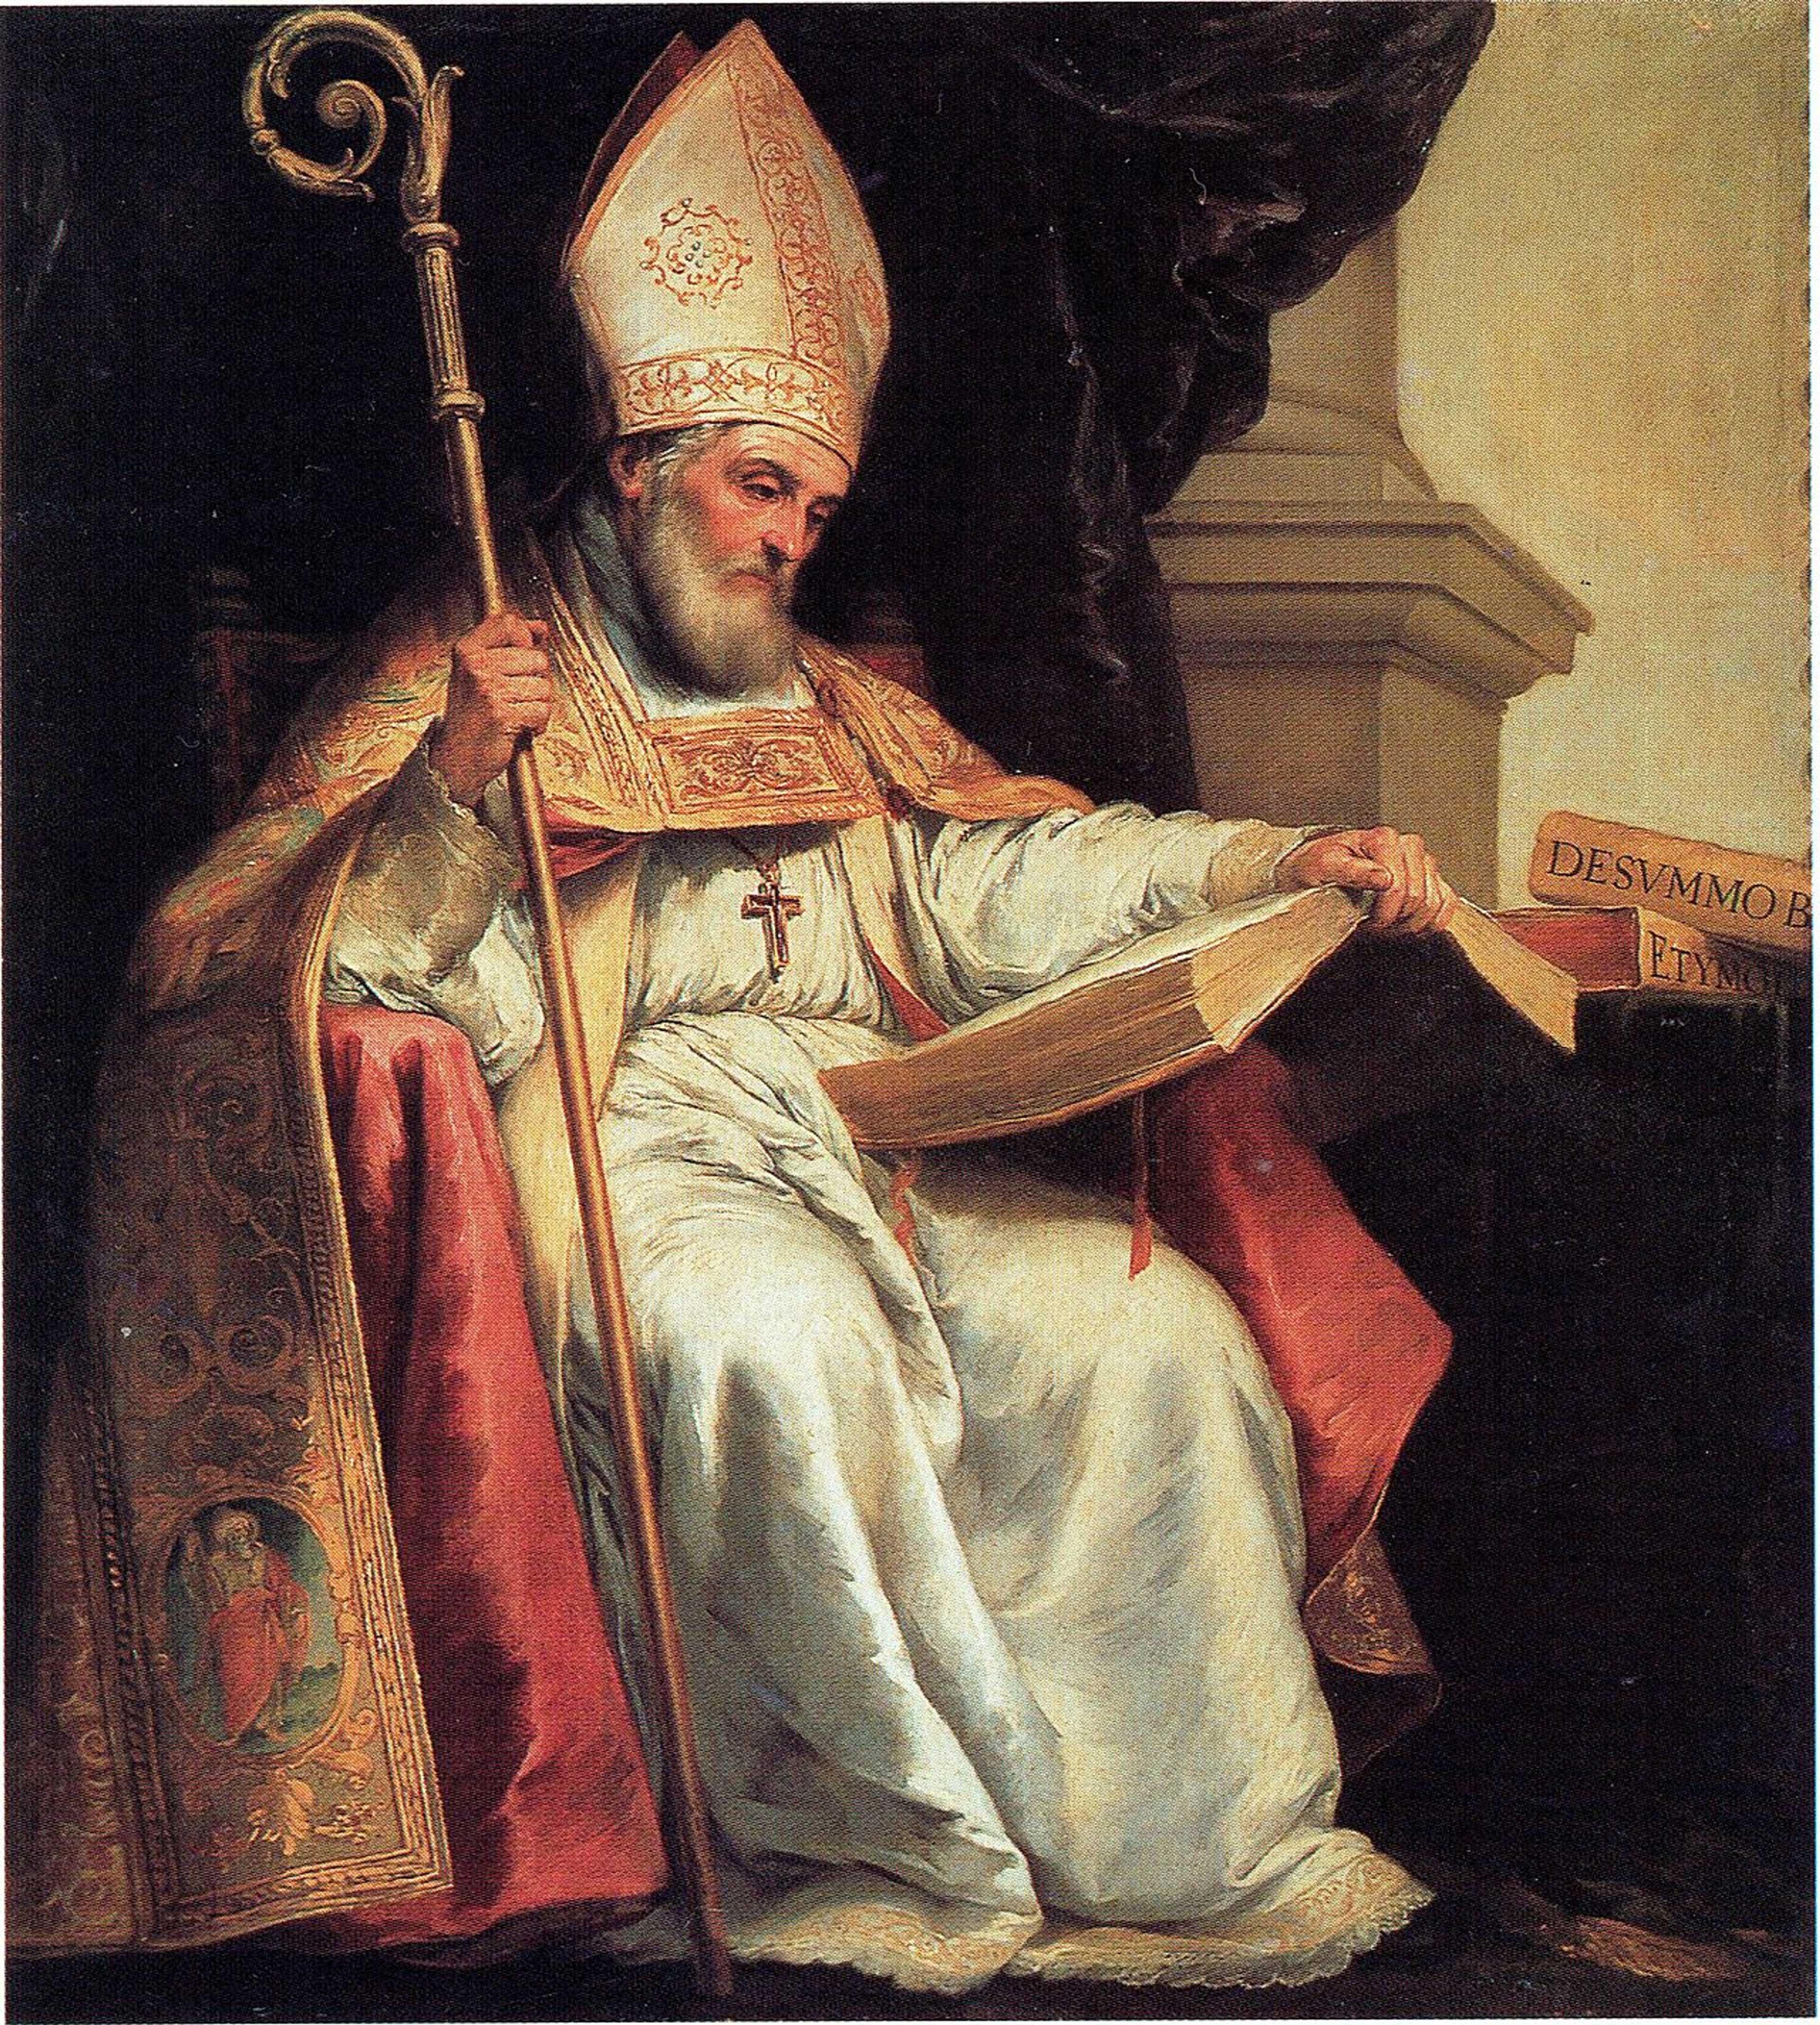 Colourful portrait of Isidore of Seville, dressed in religious robes and holding a staff, and reading a large book.